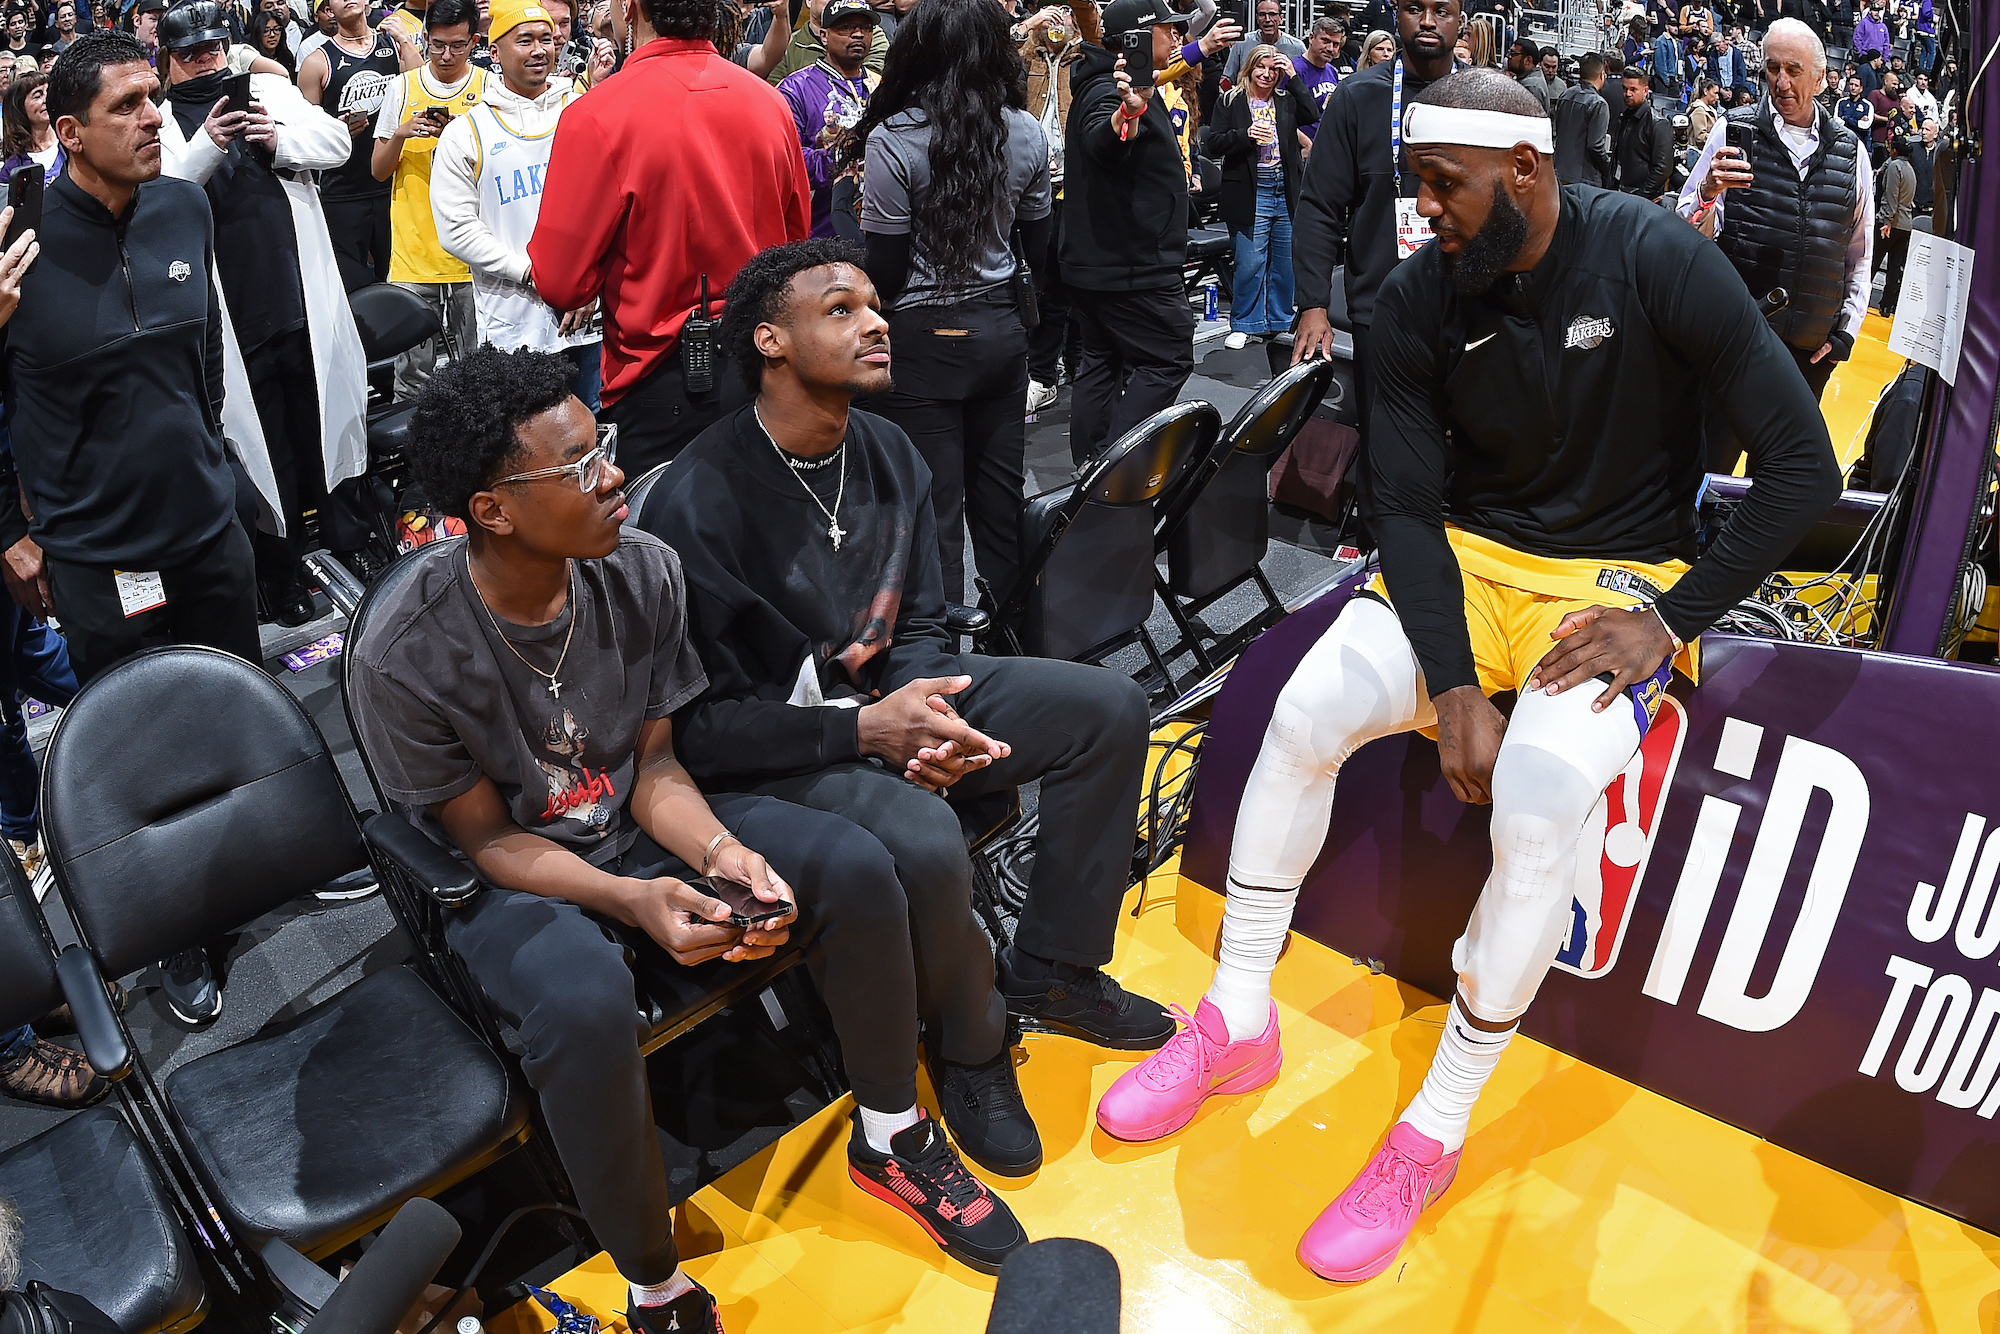 LOS ANGELES, CA - FEBRUARY 7: Brice James, Bronny James and LeBron James #6 of the Los Angeles Lakers talk during the game against the Oklahoma City Thunder on February 7, 2023 at Crypto.Com Arena in Los Angeles, California. NOTE TO USER: User expressly acknowledges and agrees that, by downloading and/or using this Photograph, user is consenting to the terms and conditions of the Getty Images License Agreement. Mandatory Copyright Notice: Copyright 2023 NBAE (Photo by Andrew D. Bernstein/NBAE via Getty Images)